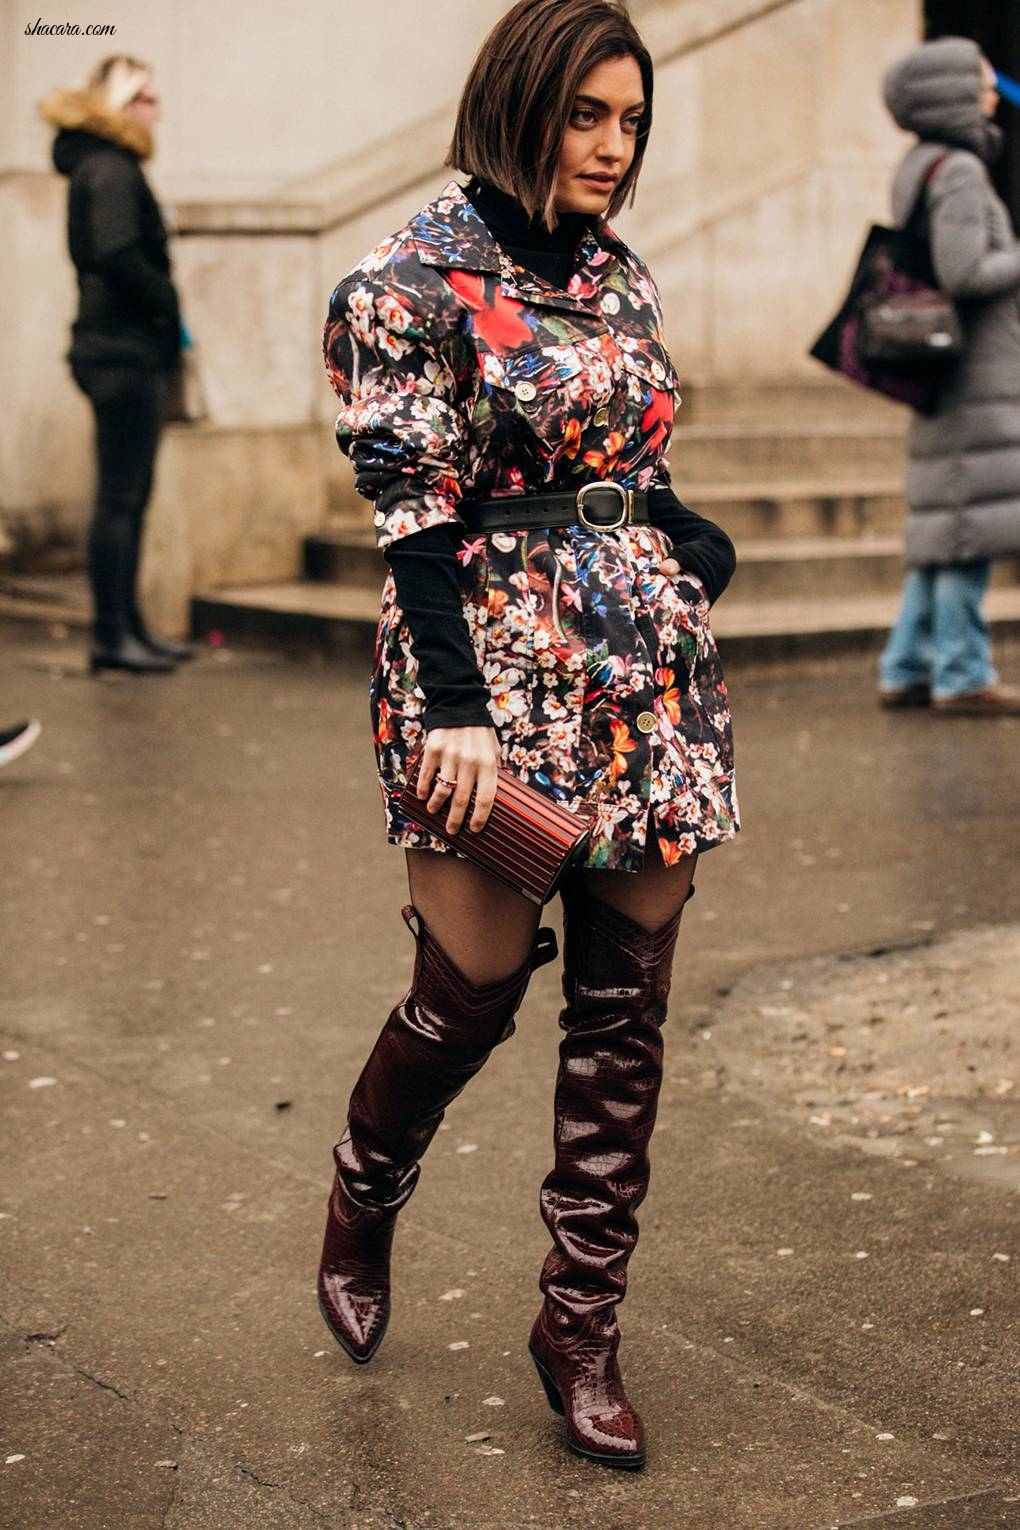 THE BEST STREET STYLE FROM COUTURE FASHION WEEK PART 5